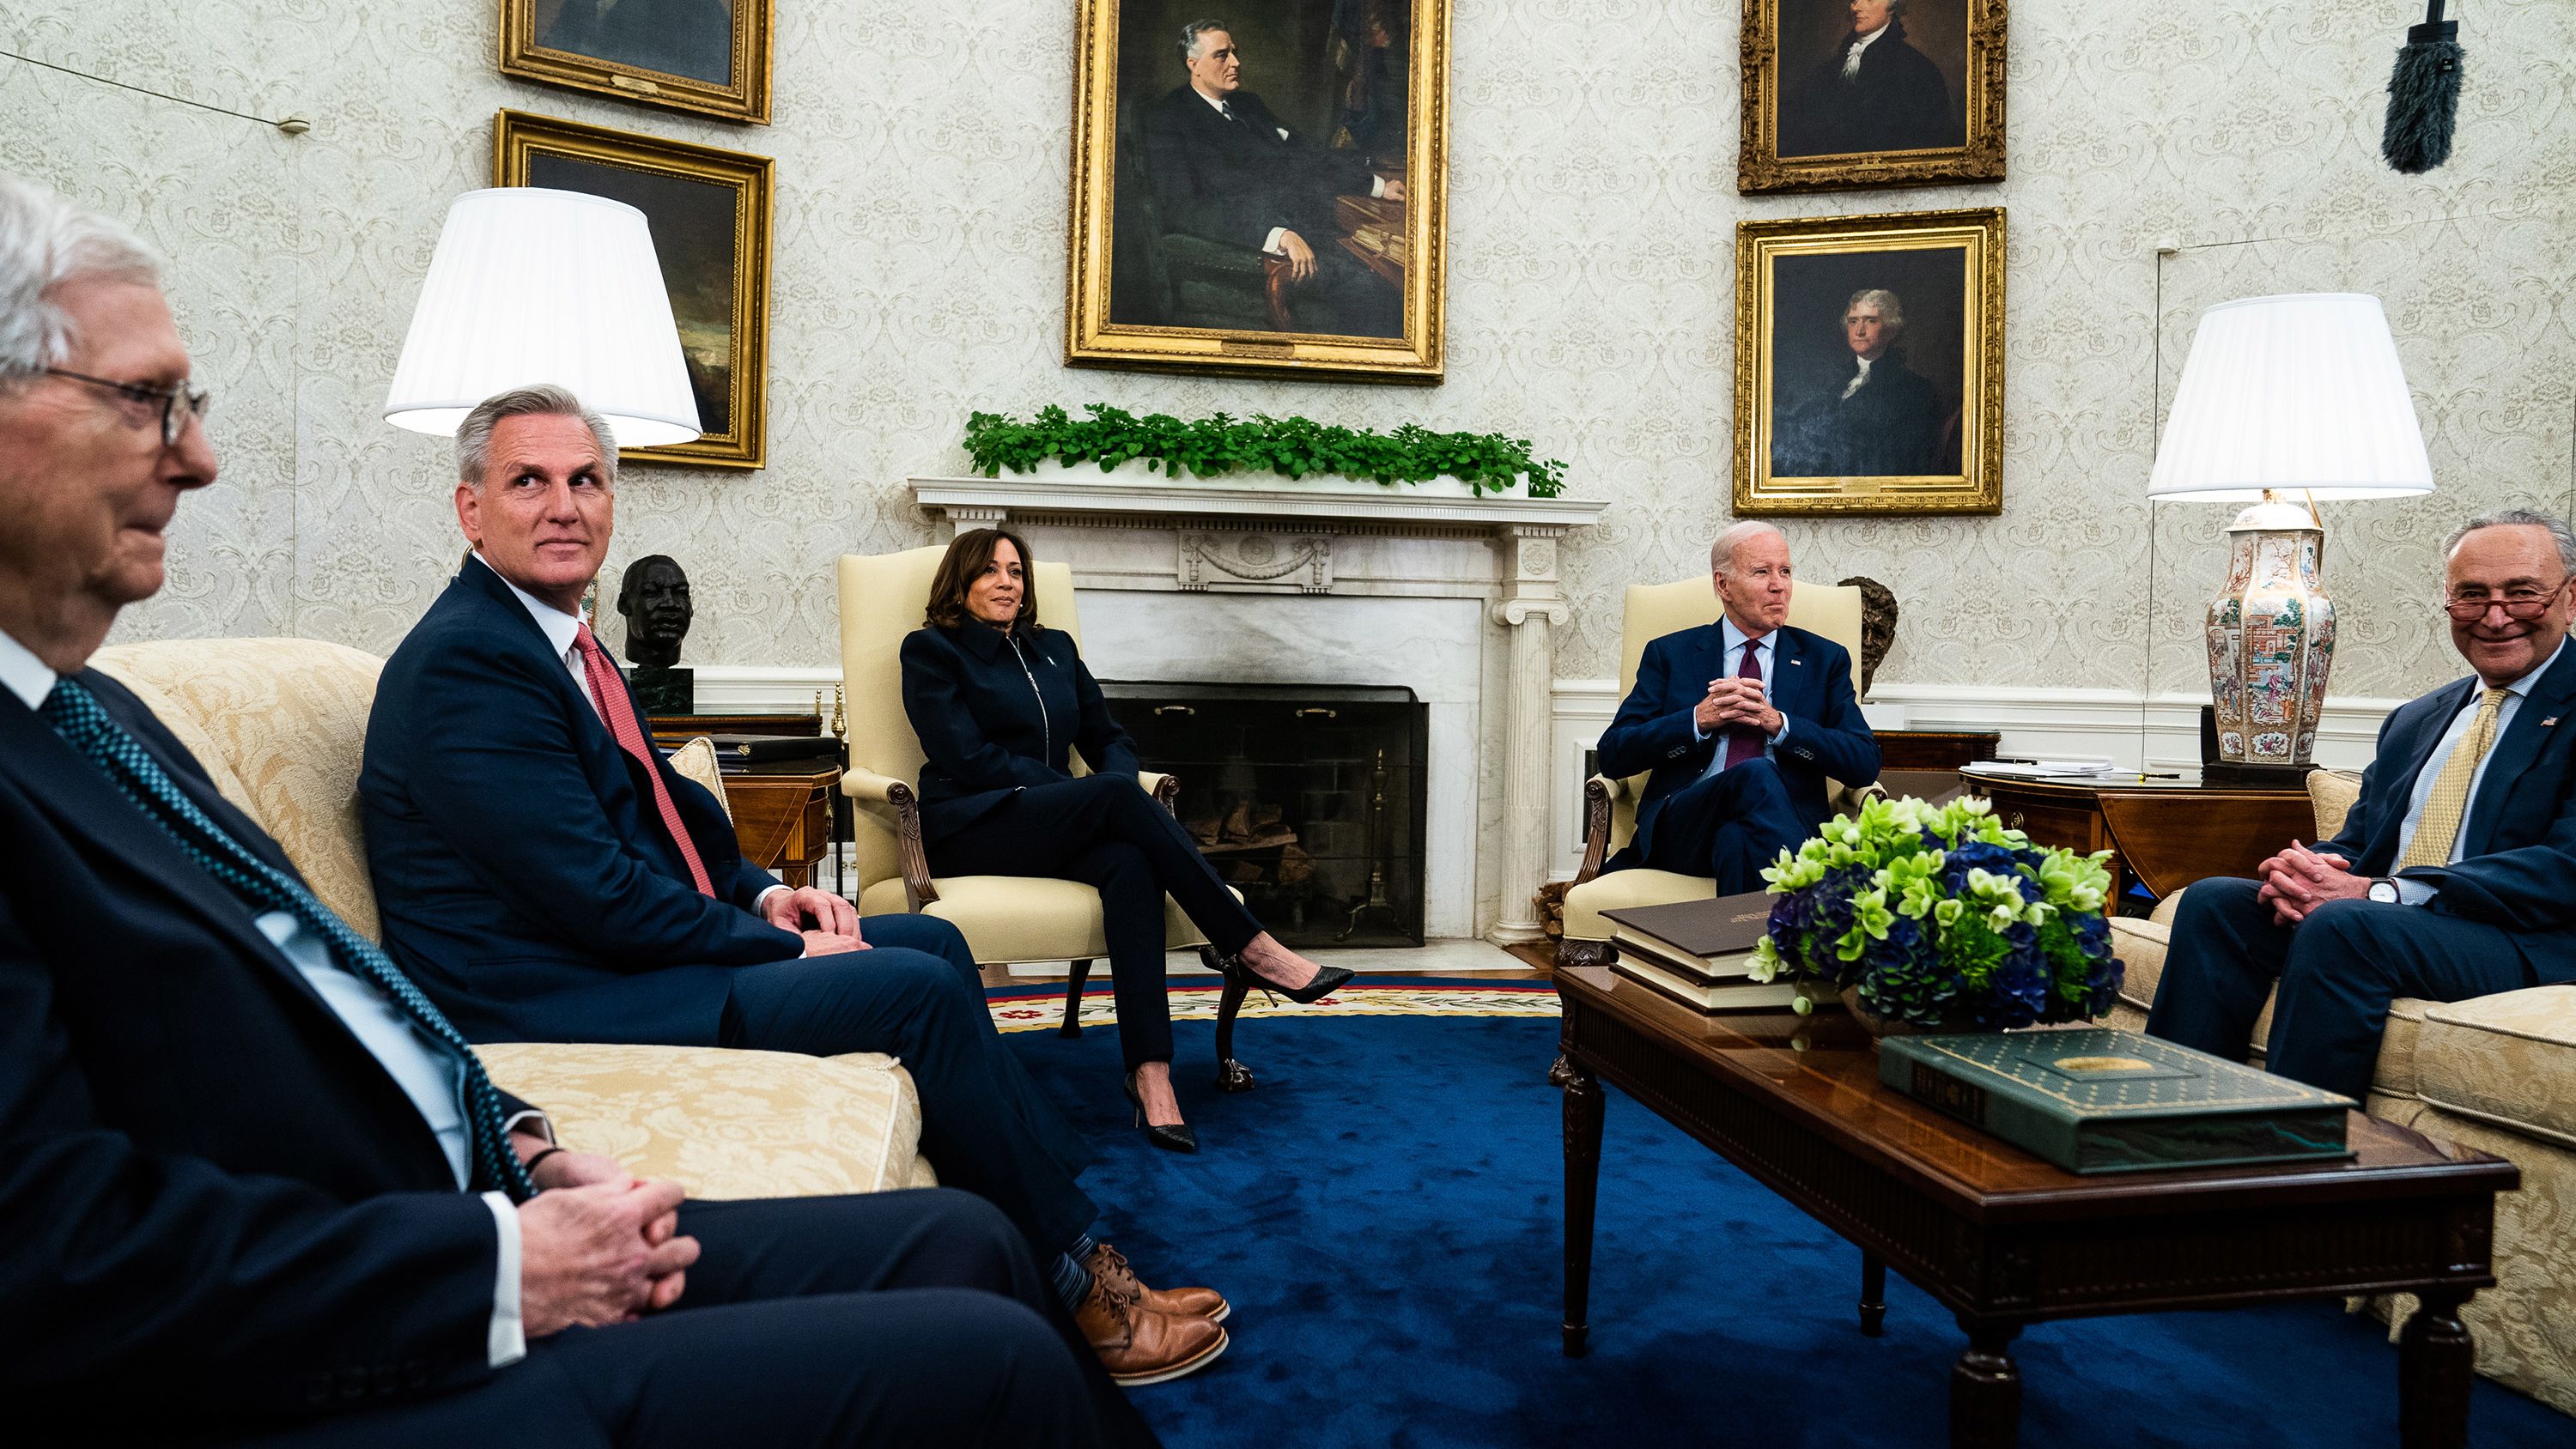 McCarthy, second from left, joins other congressional leaders as <a href="https://www.cnn.com/2023/05/16/politics/biden-kevin-mccarthy-debt-default-negotiations/index.html" target="_blank">they meet with Biden and Harris</a> in the White House Oval Office in May 2023. They were meeting to talk about a deal to raise the nation's borrowing limit and avoid a historic default.